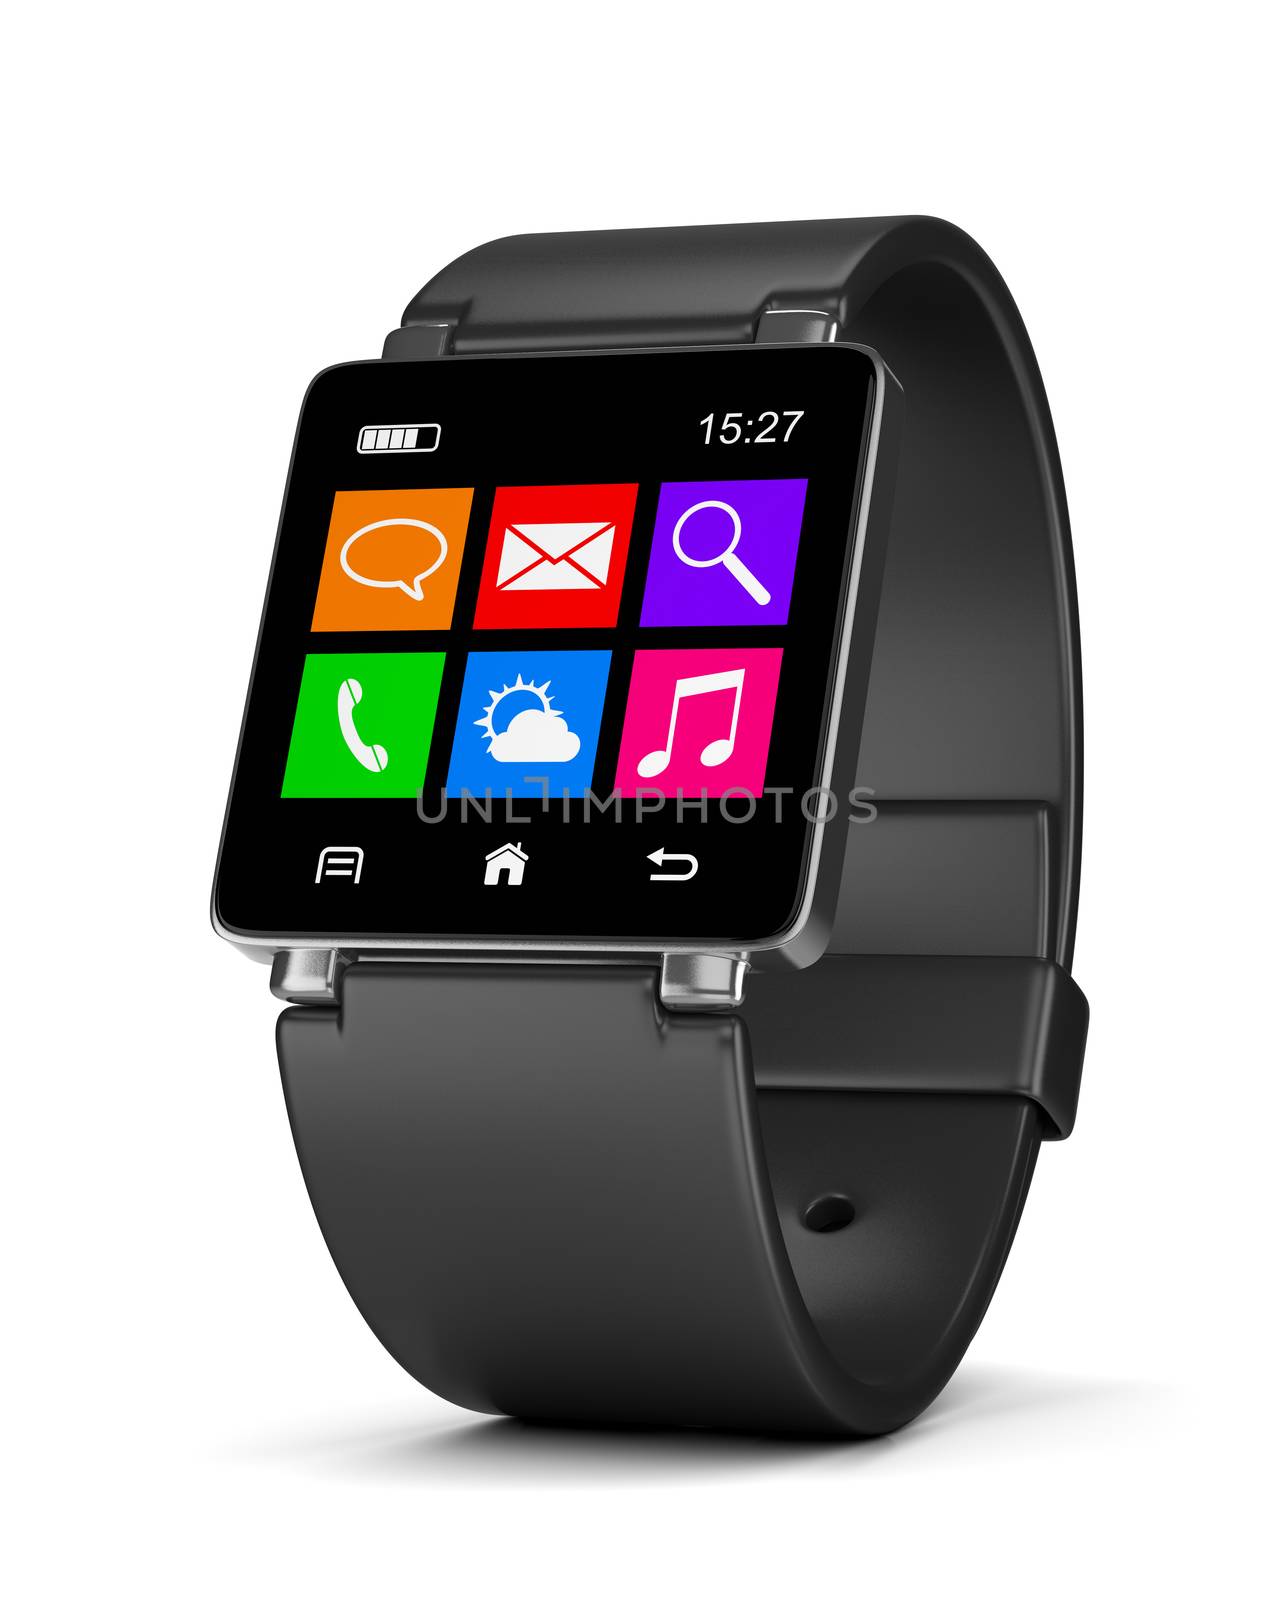 Smartwatch Apps on White by make